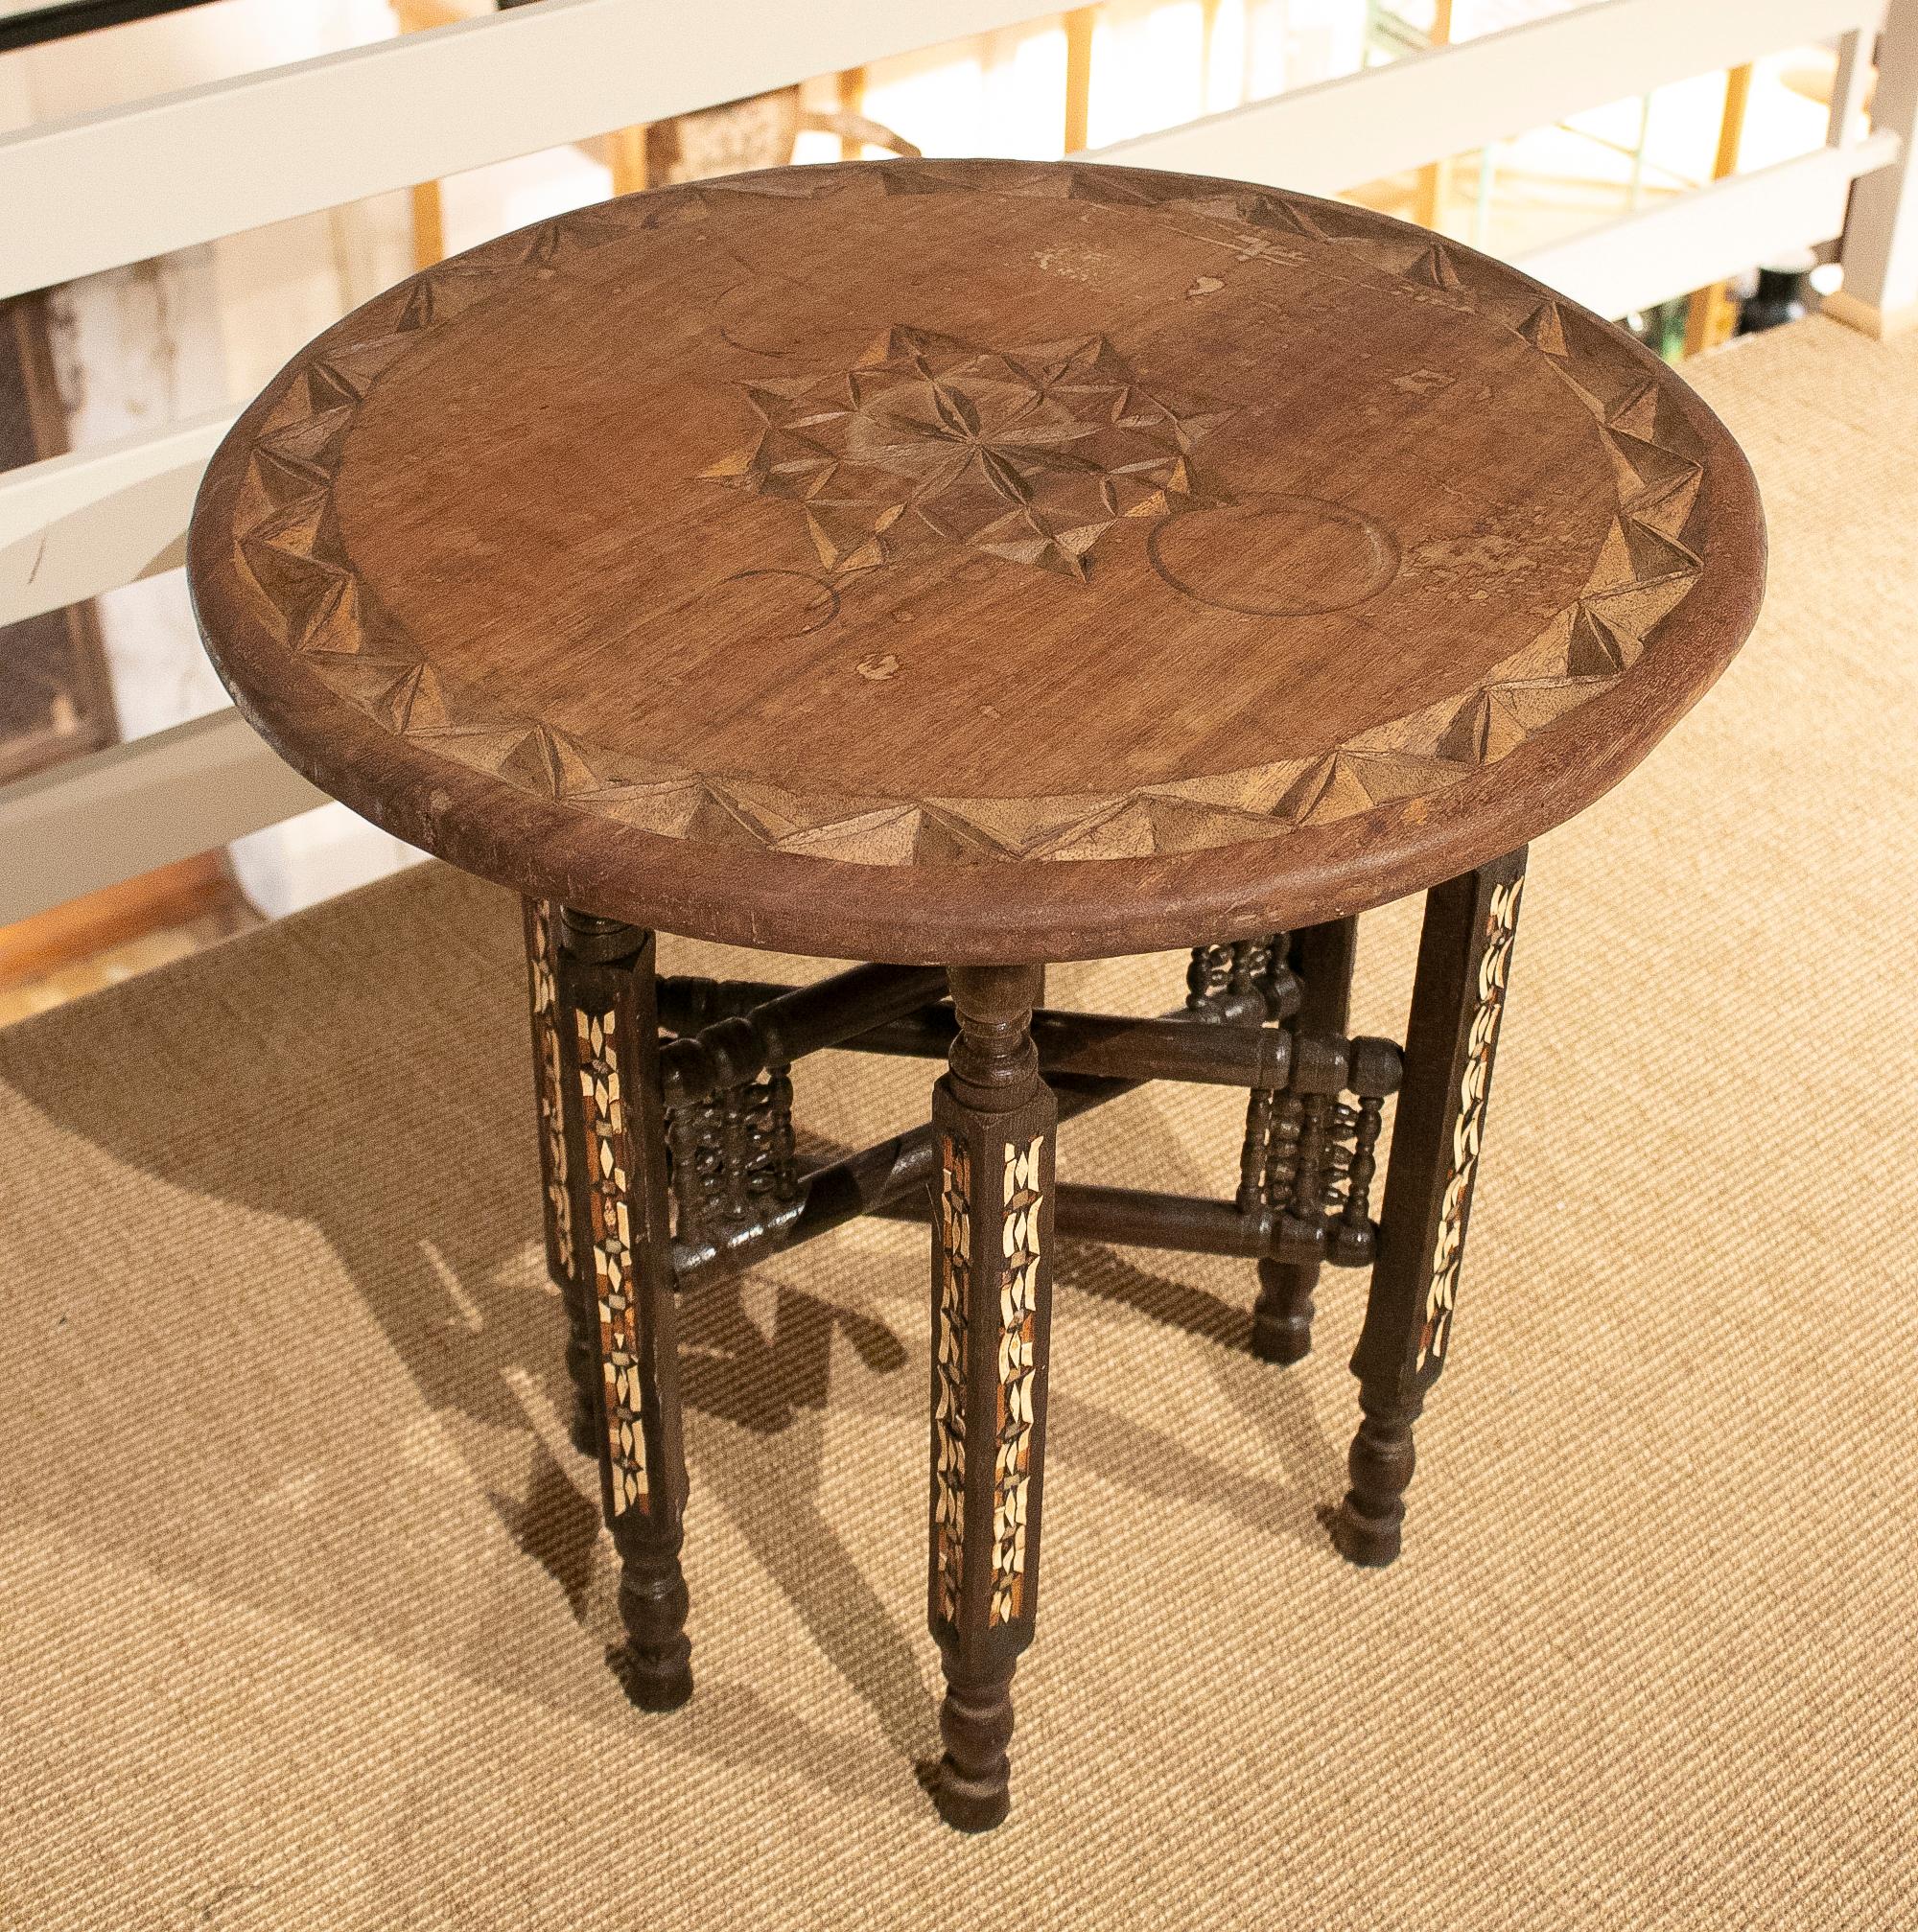 1980s Moroccan hand carved round wooden inlay table.